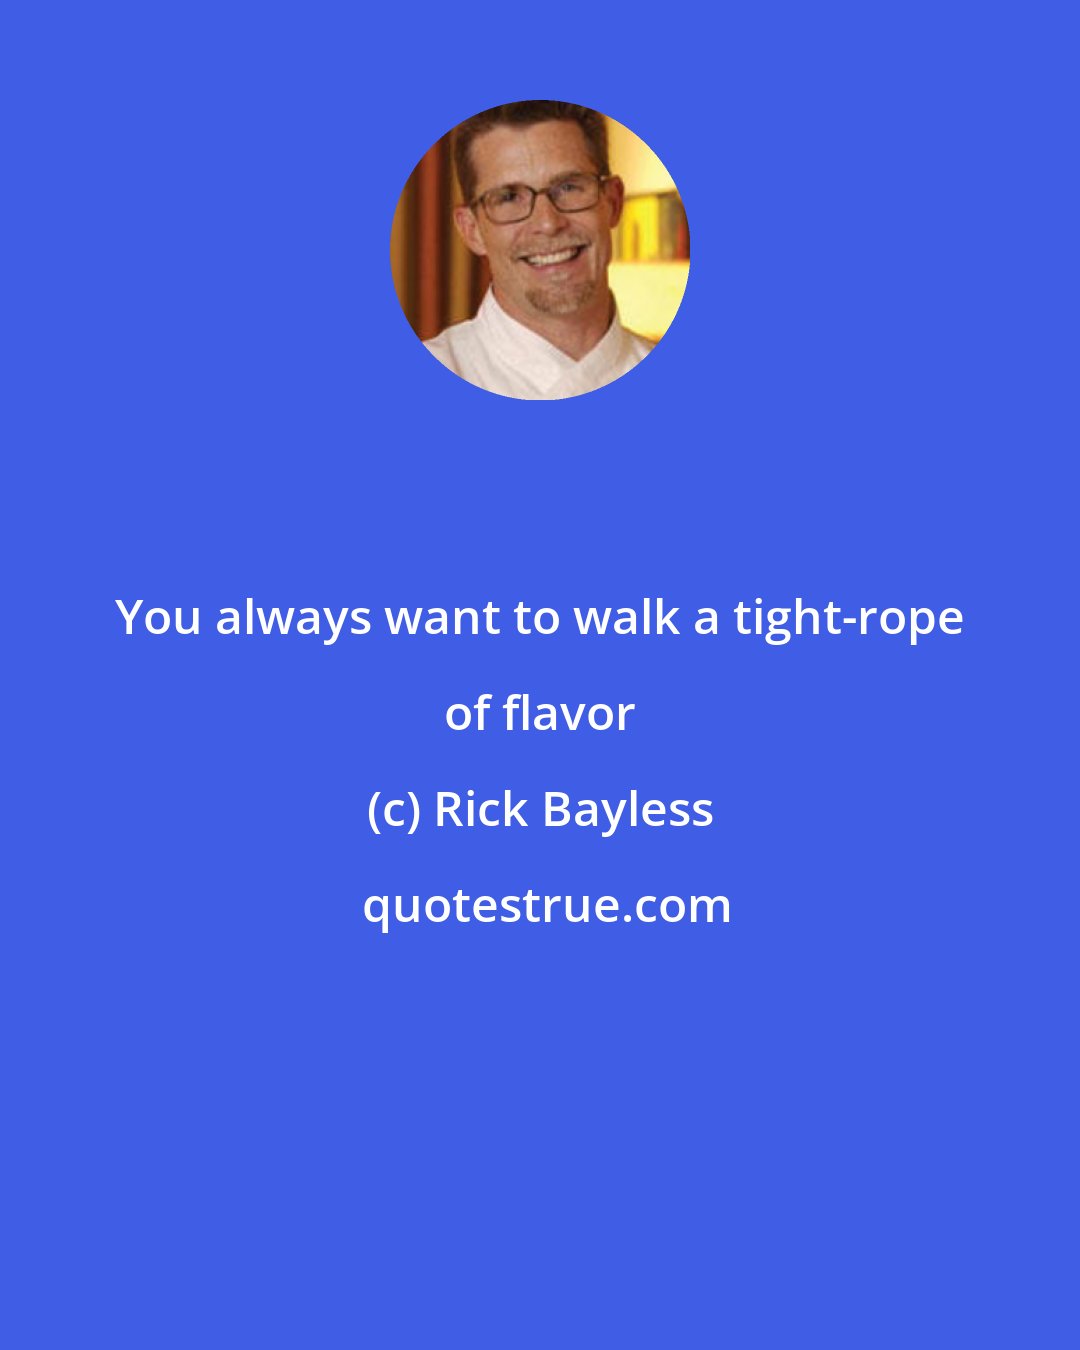 Rick Bayless: You always want to walk a tight-rope of flavor